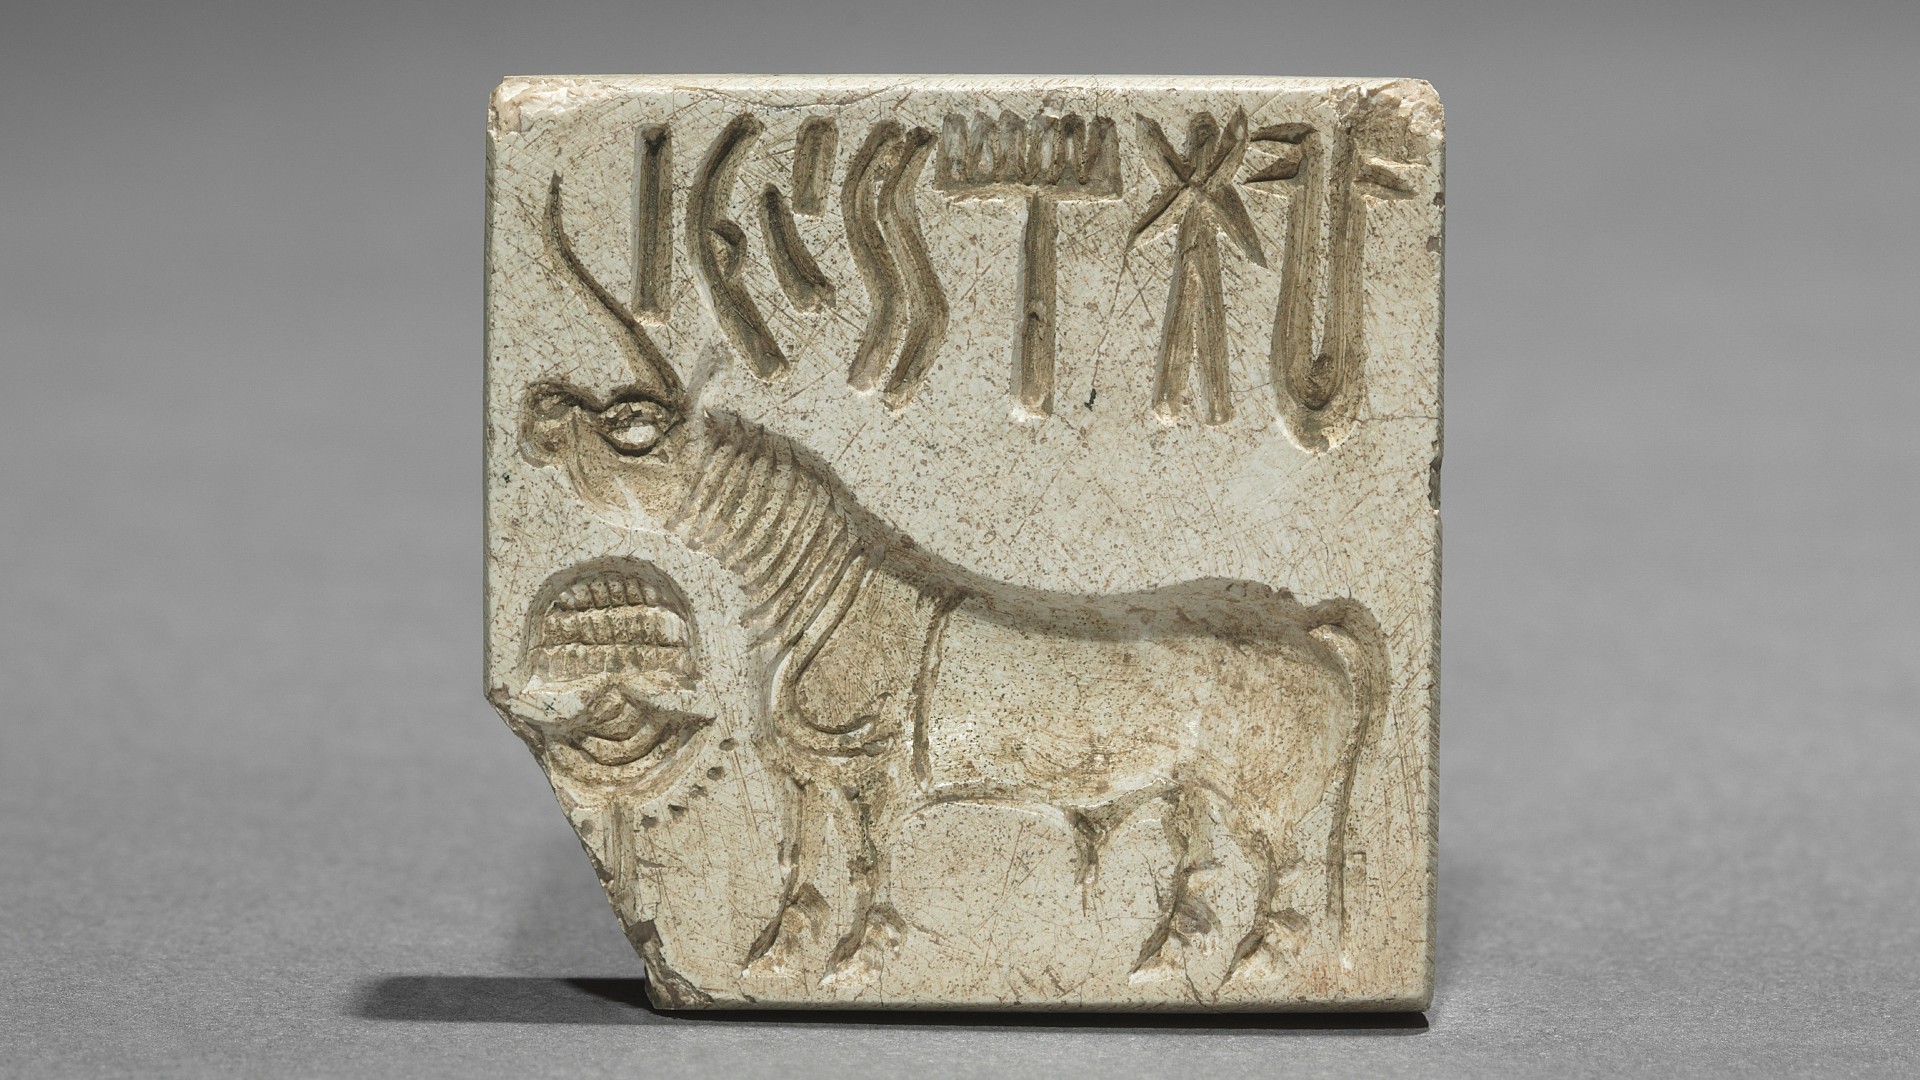 This photo shows a seal with a unicorn and above it an inscription in an ancient language.